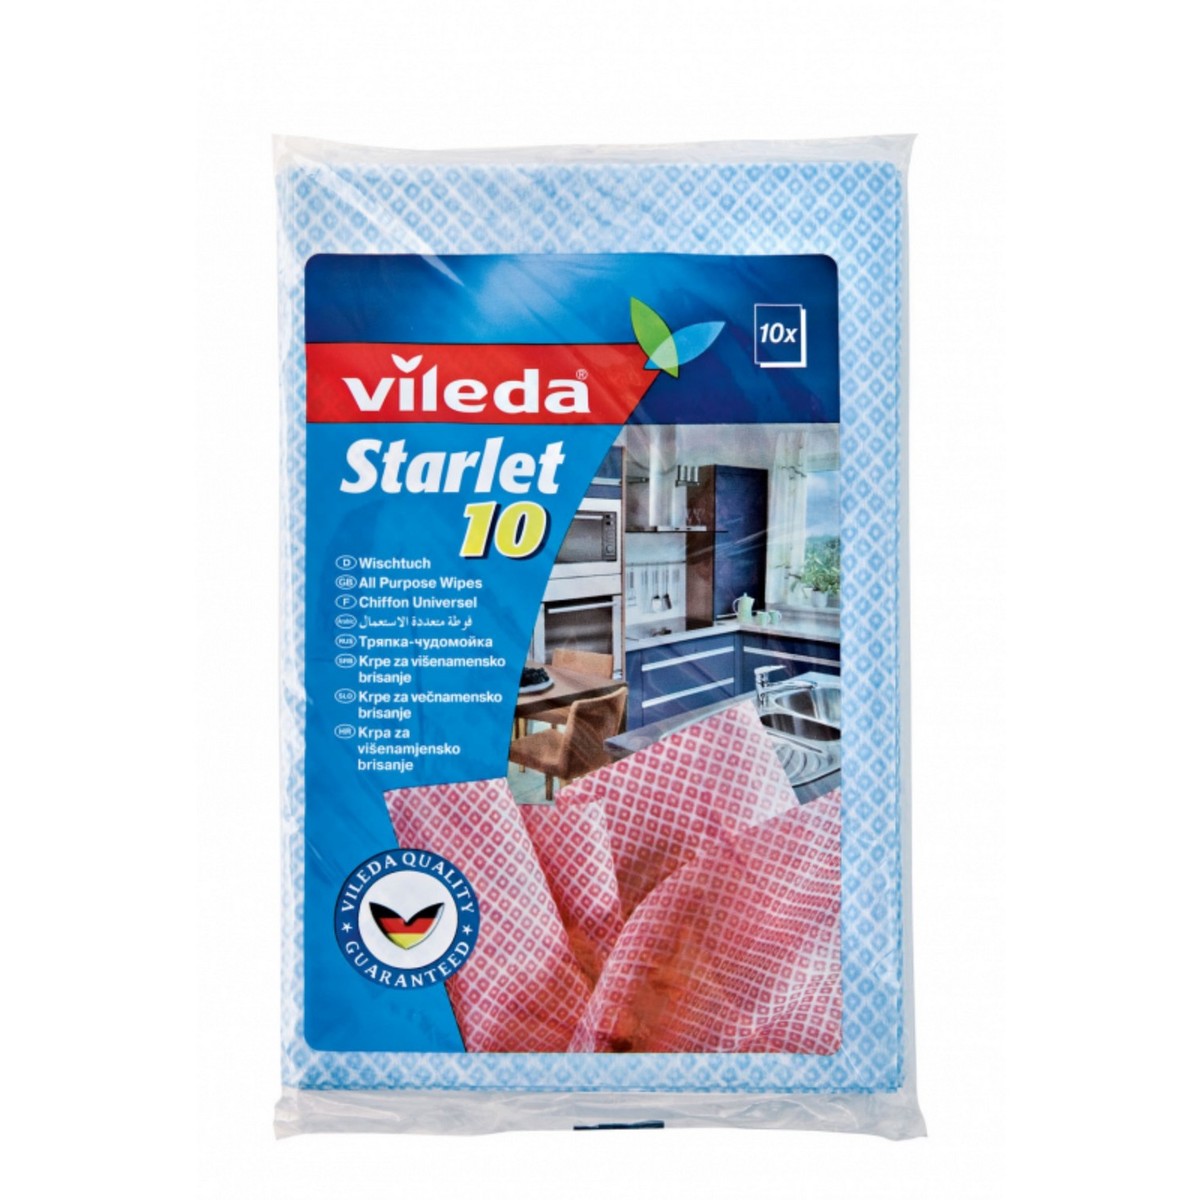 Vileda Starlet All Purpose Cloth Wipes Semi-disposable Cleaning Cloth 10pcs